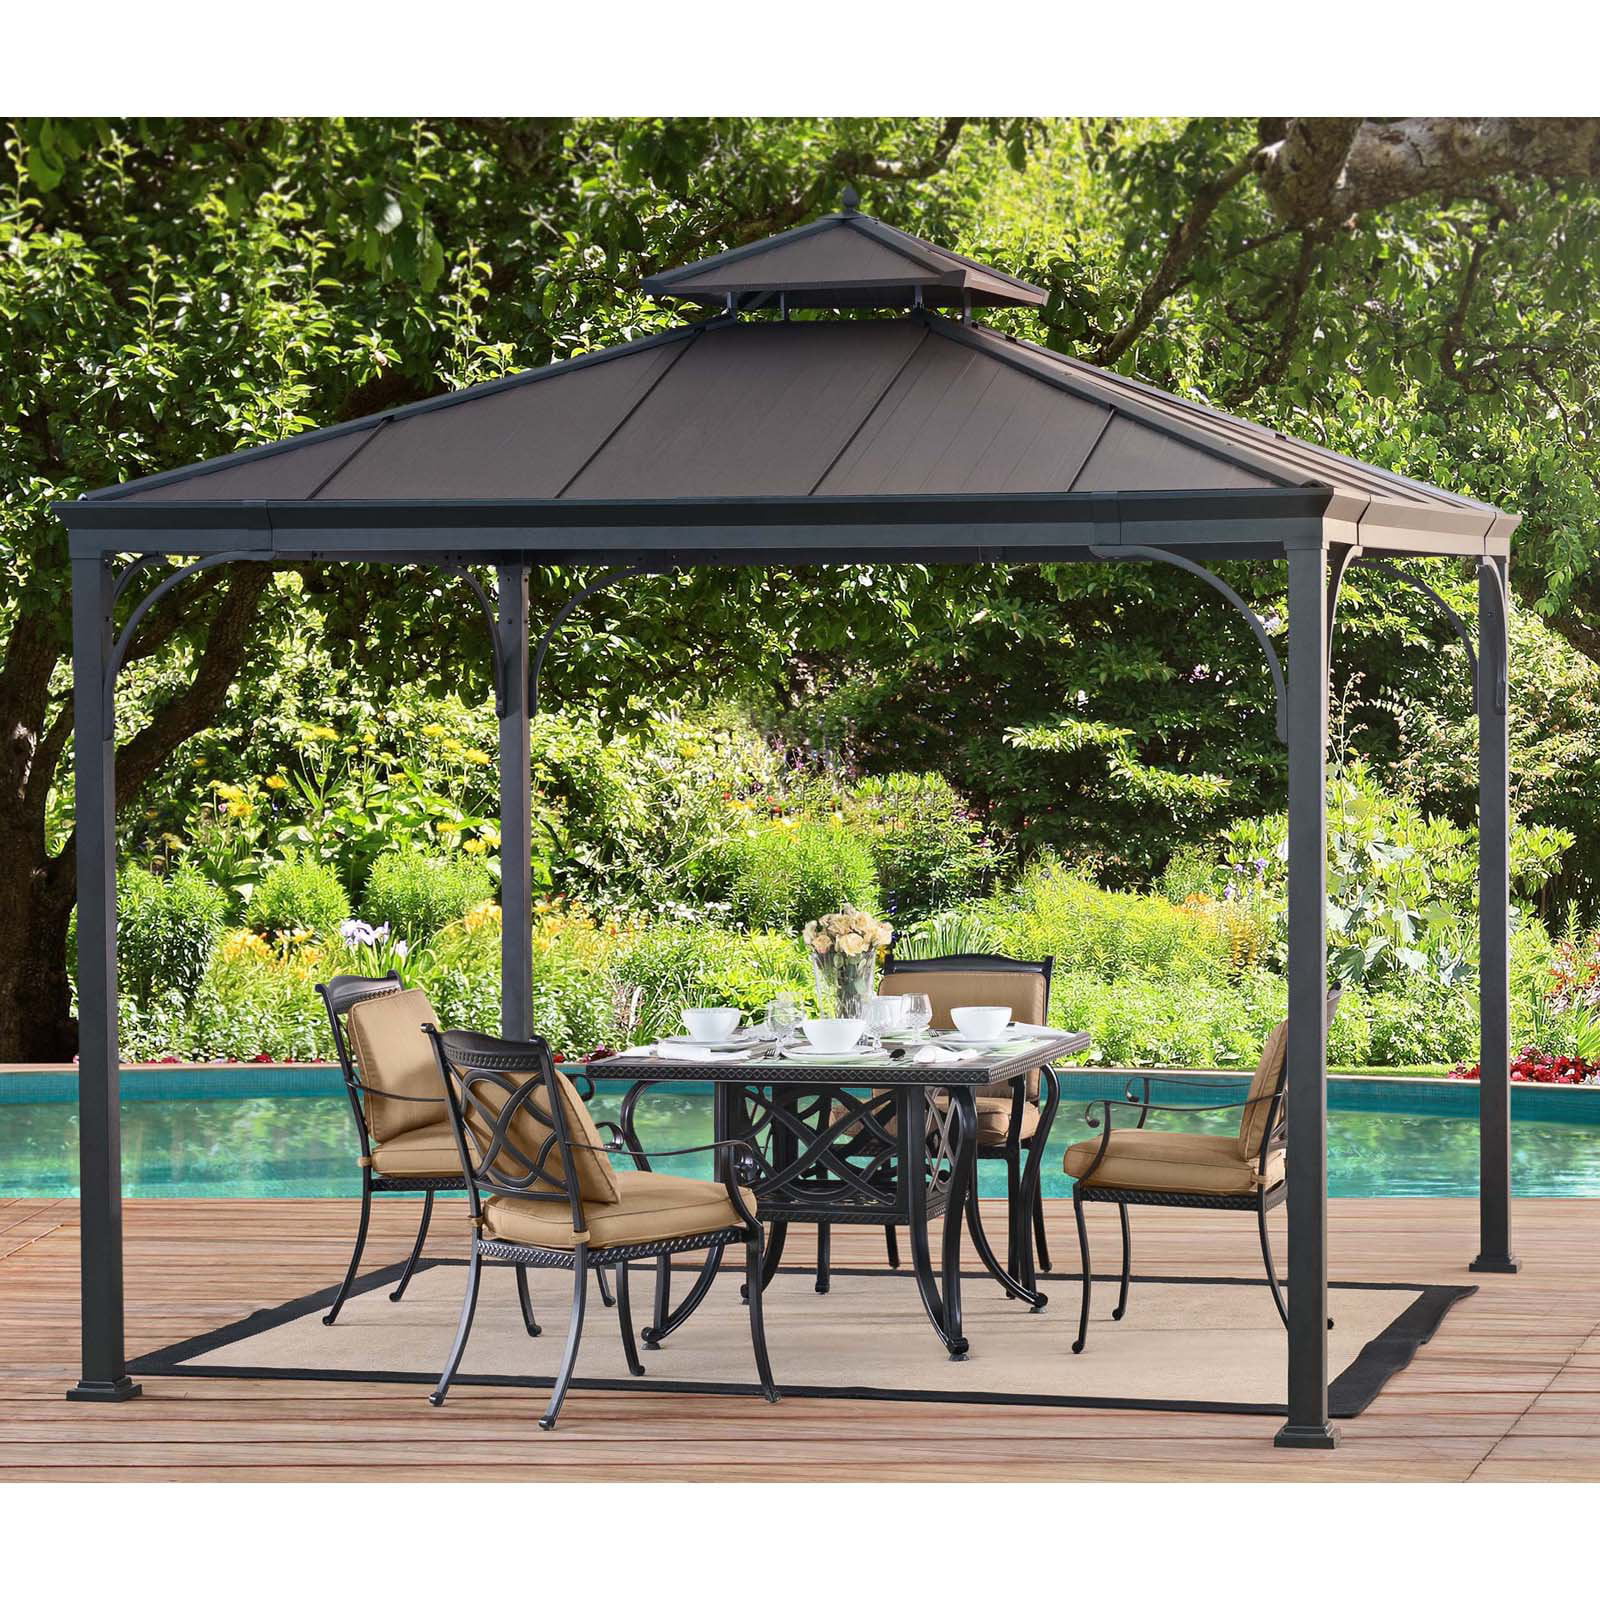 Sunjoy 10' x 10' Hardtop and Grill Black and Brown Square Gazebos...